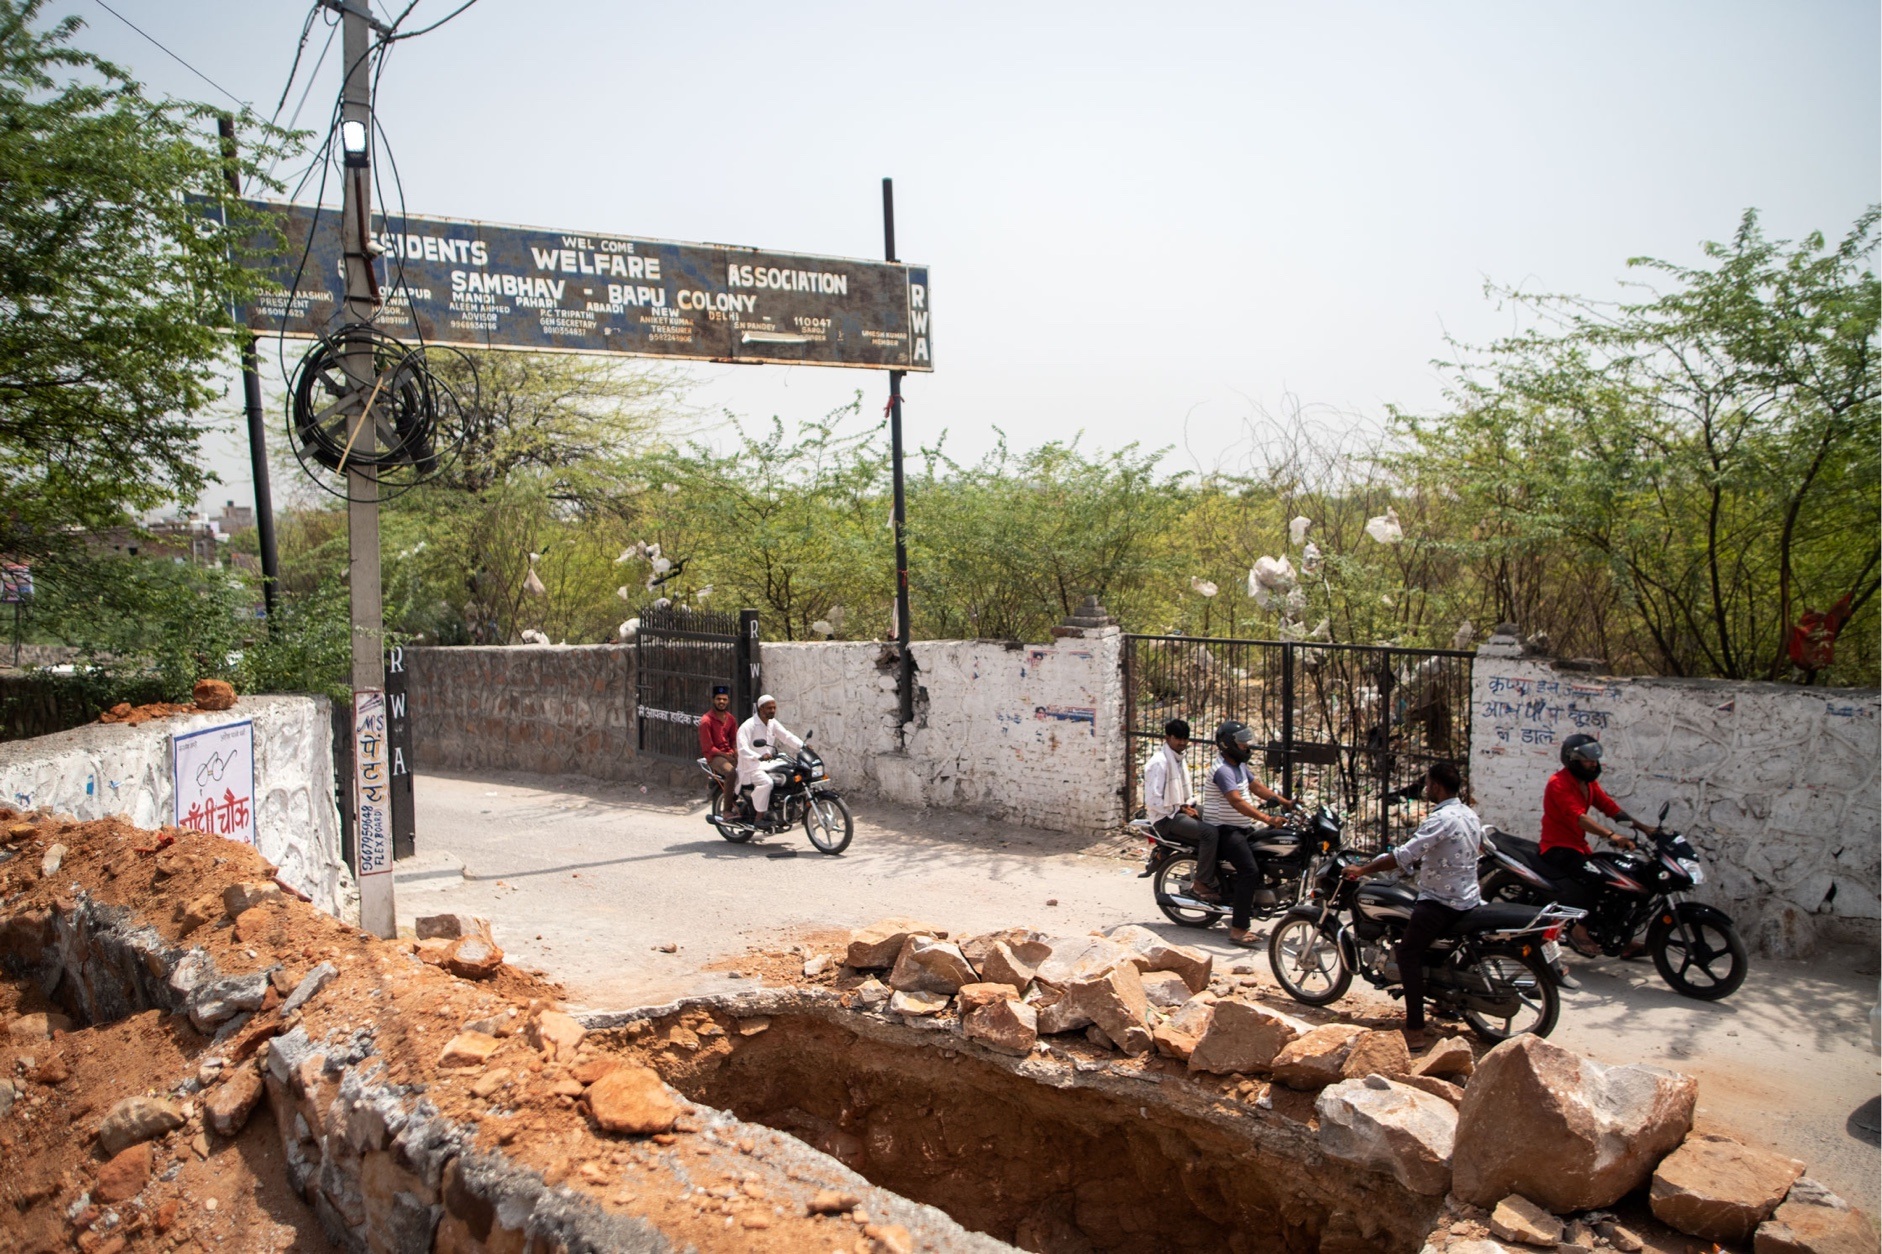 Entrance to the Bapu Colony in the south of New Delhi showing a lot of motor bikes and construction work